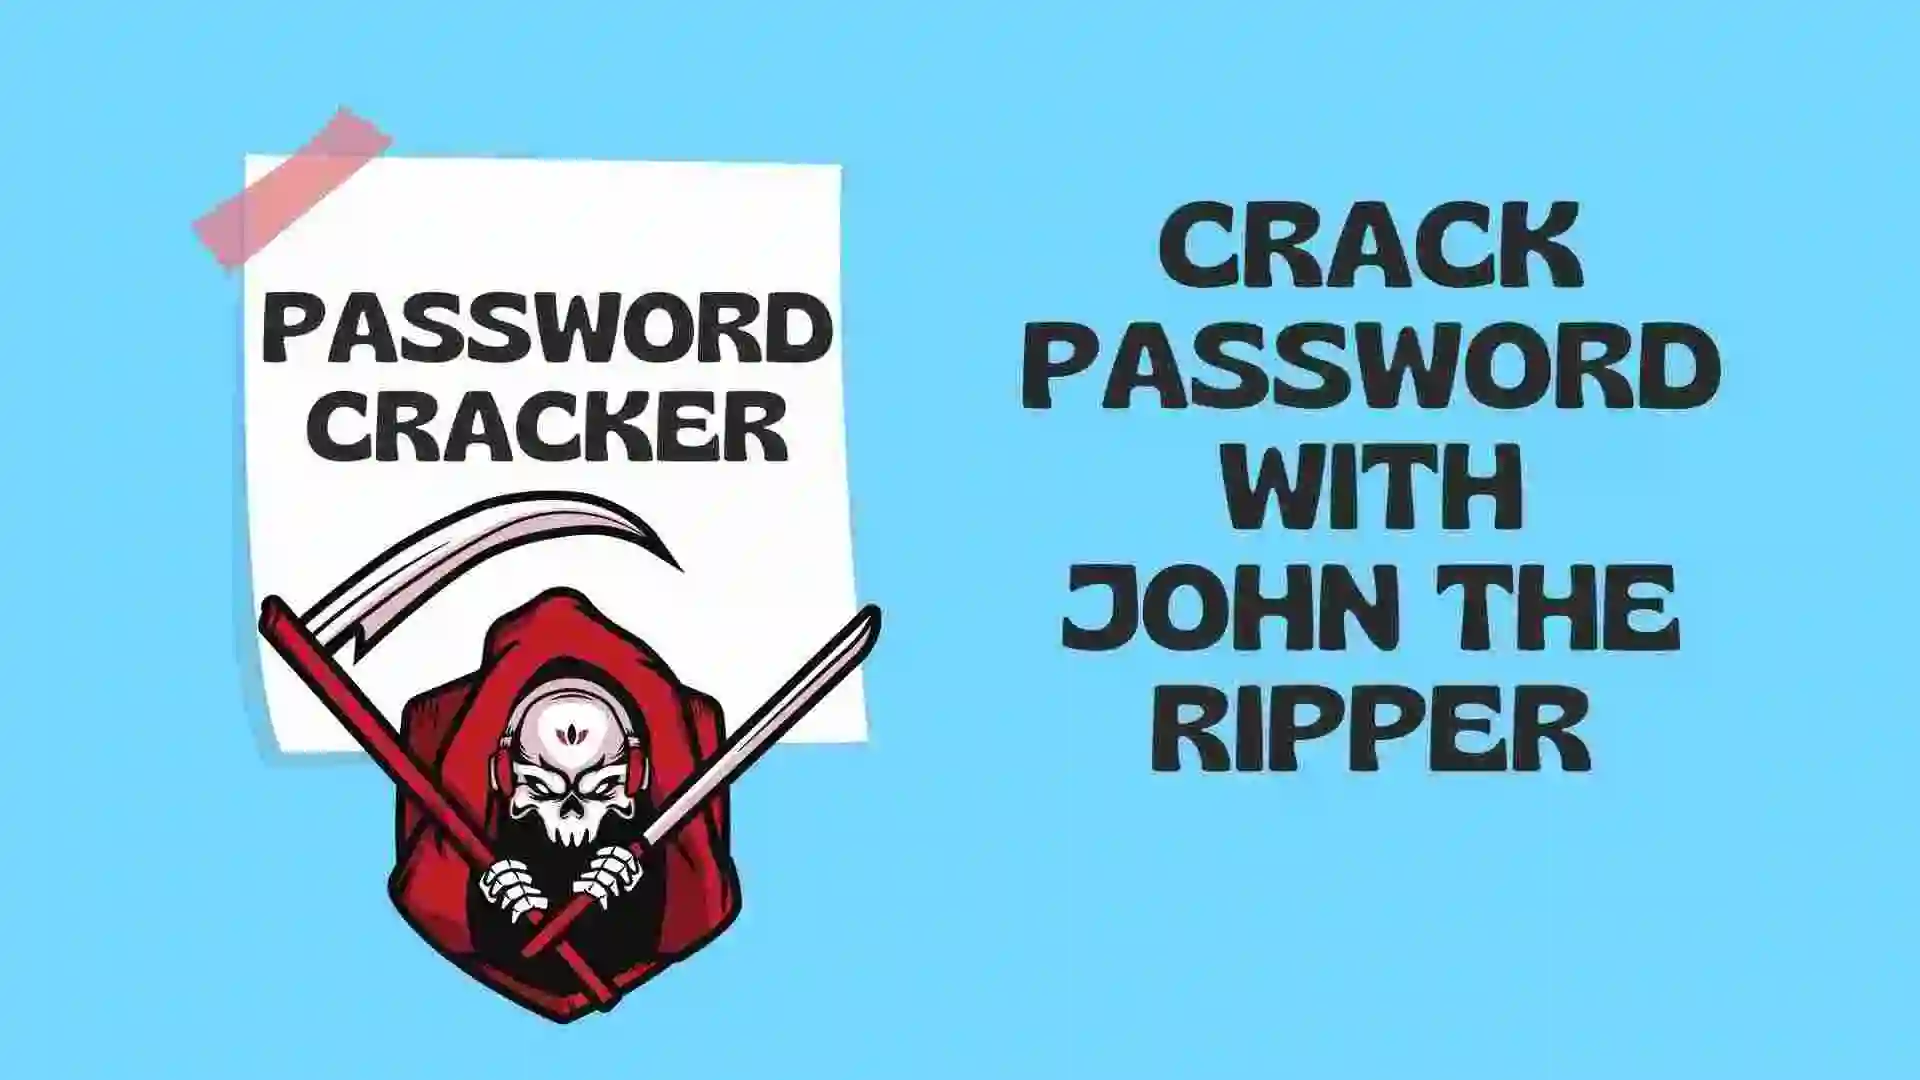 John the Ripper Tool | How to crack the Password of Files